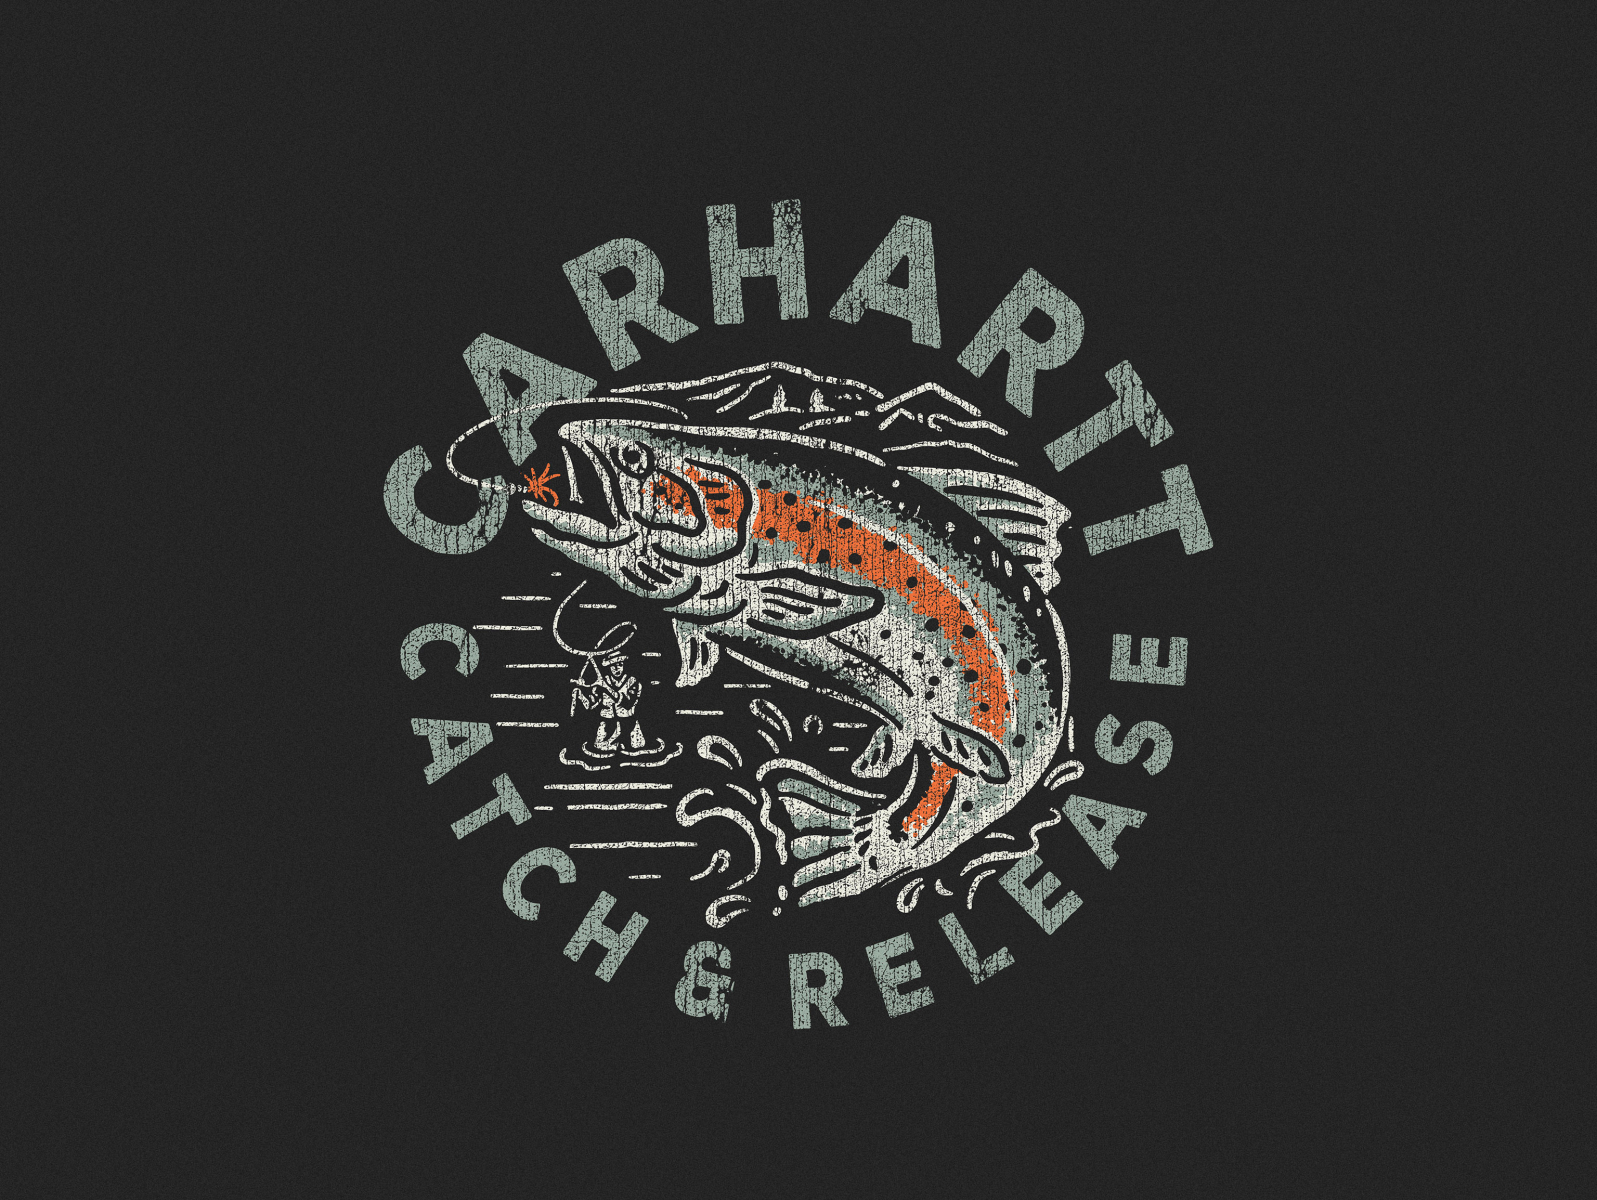 Dribbble - CARHARTT-RESULTS.jpg by cmpt_rules